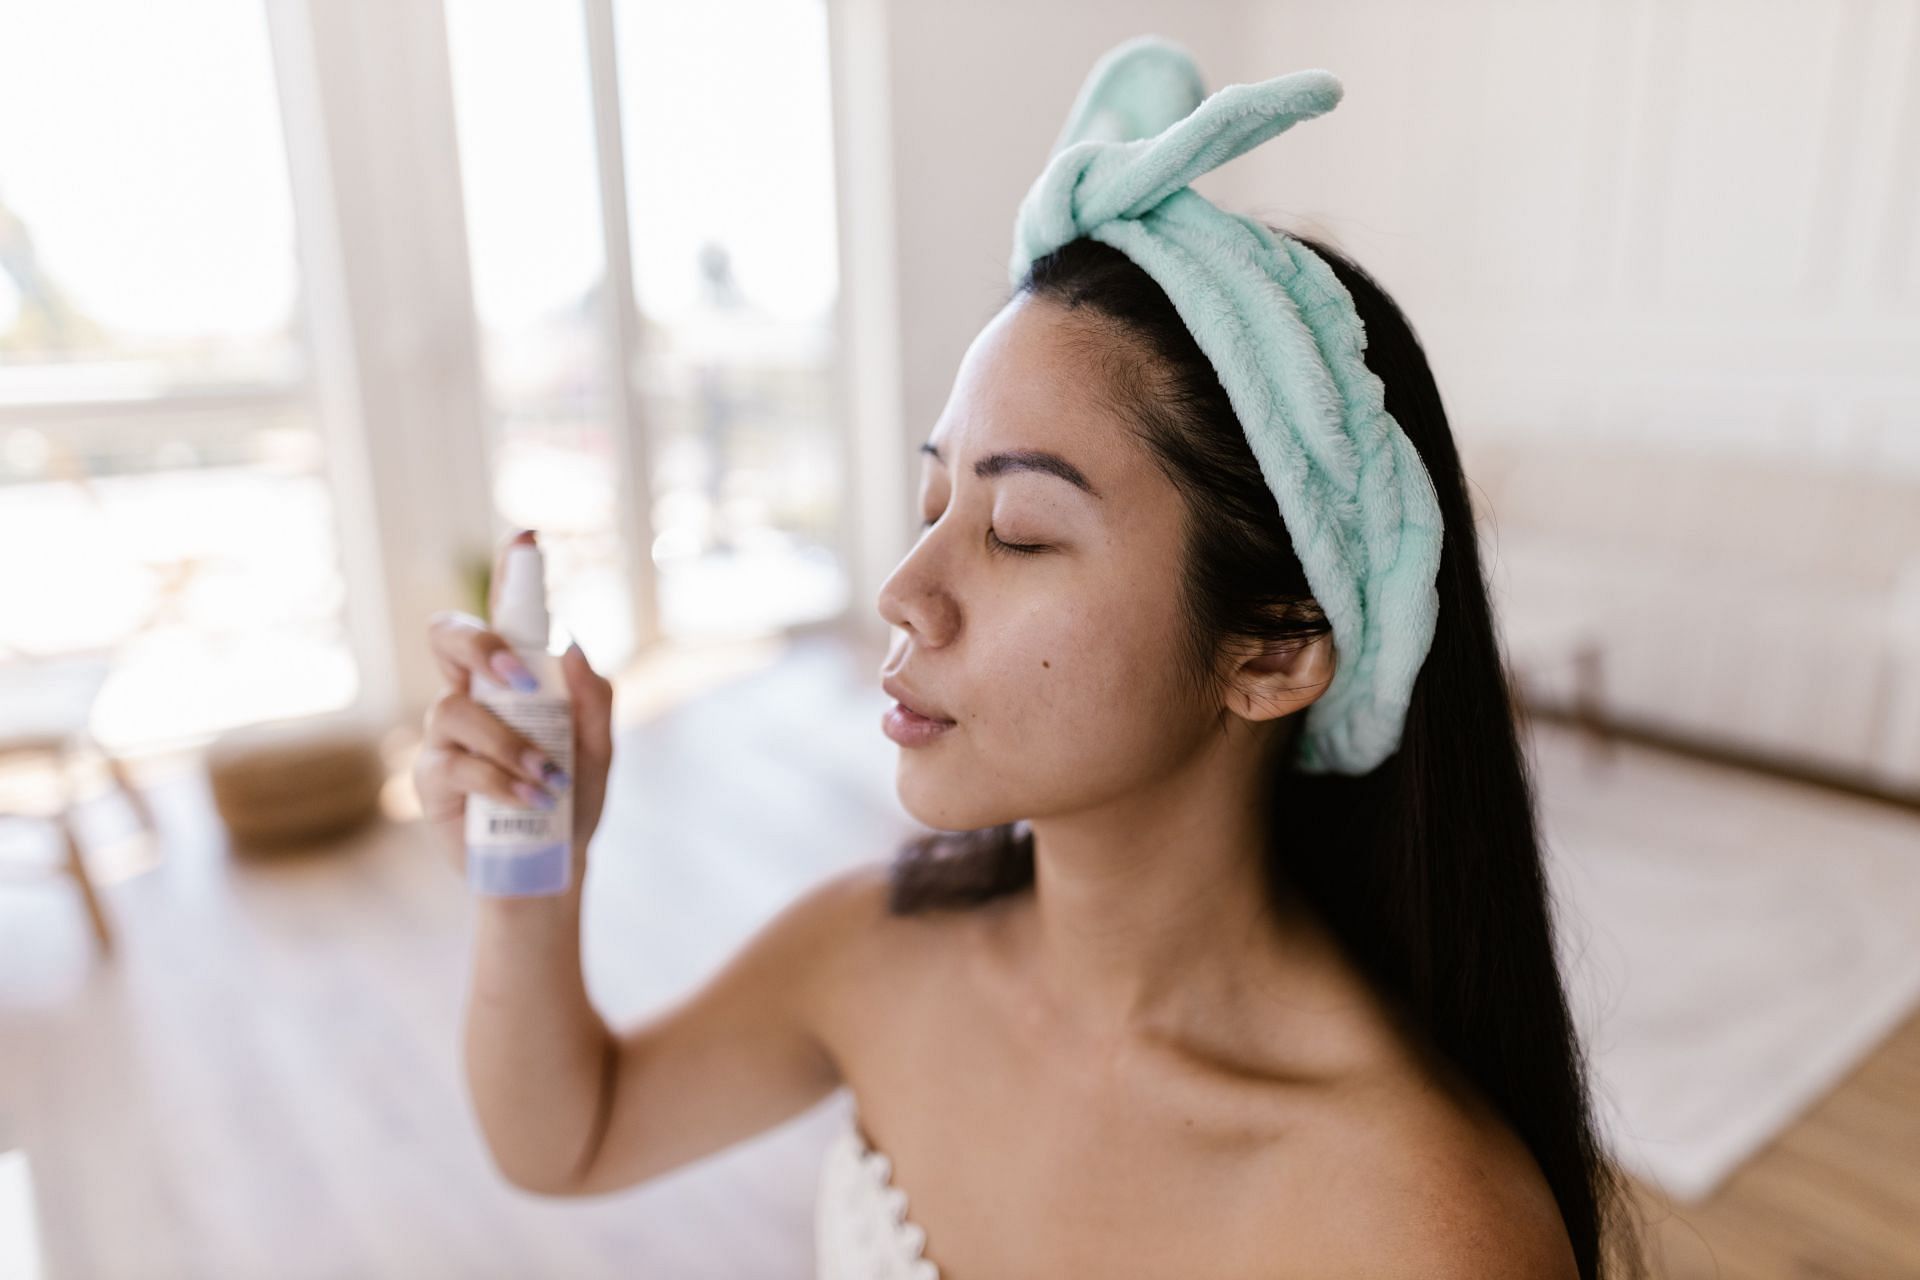 Micellar water prevents dryness. (Image via Pexels/Rodnae Productions)